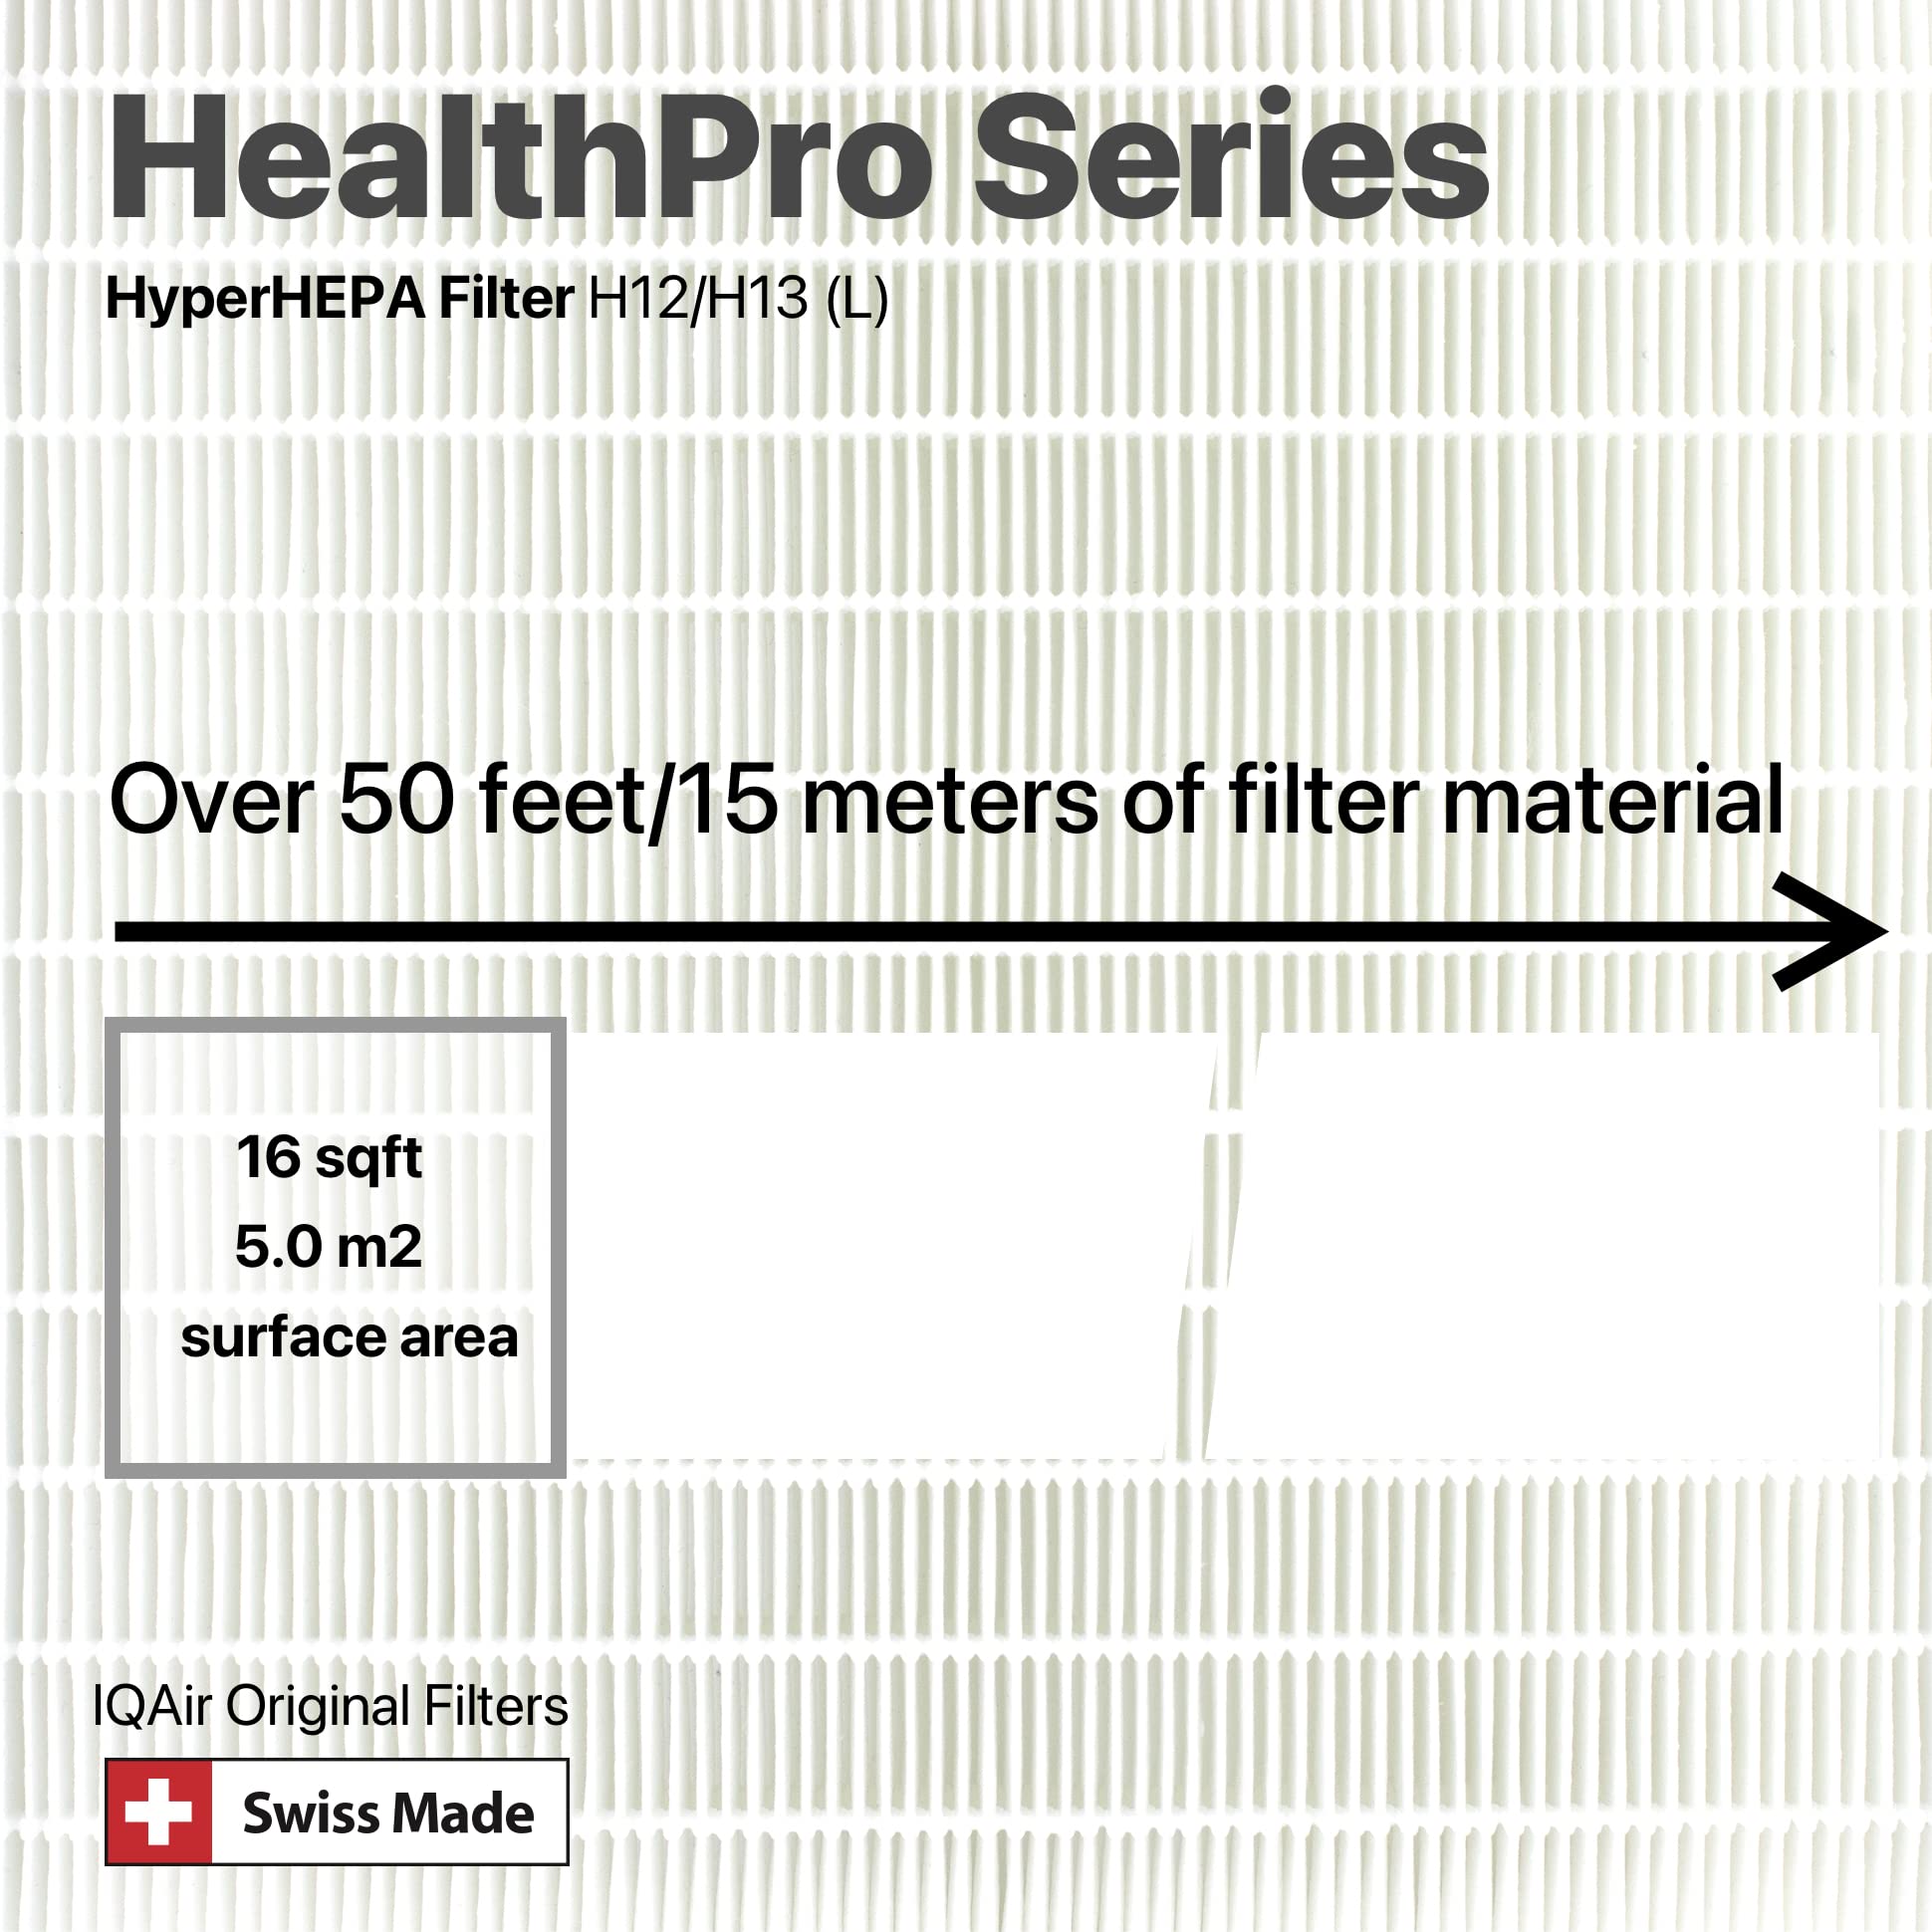 IQAir HyperHEPA Filter - Genuine Replacement Air Filter For IQAir HealthPro Series - Filters Ultrafine Particles - Allergens, Dust, Pollen, Smoke, Pets, & More - Swiss Made Filters For Air Purifiers